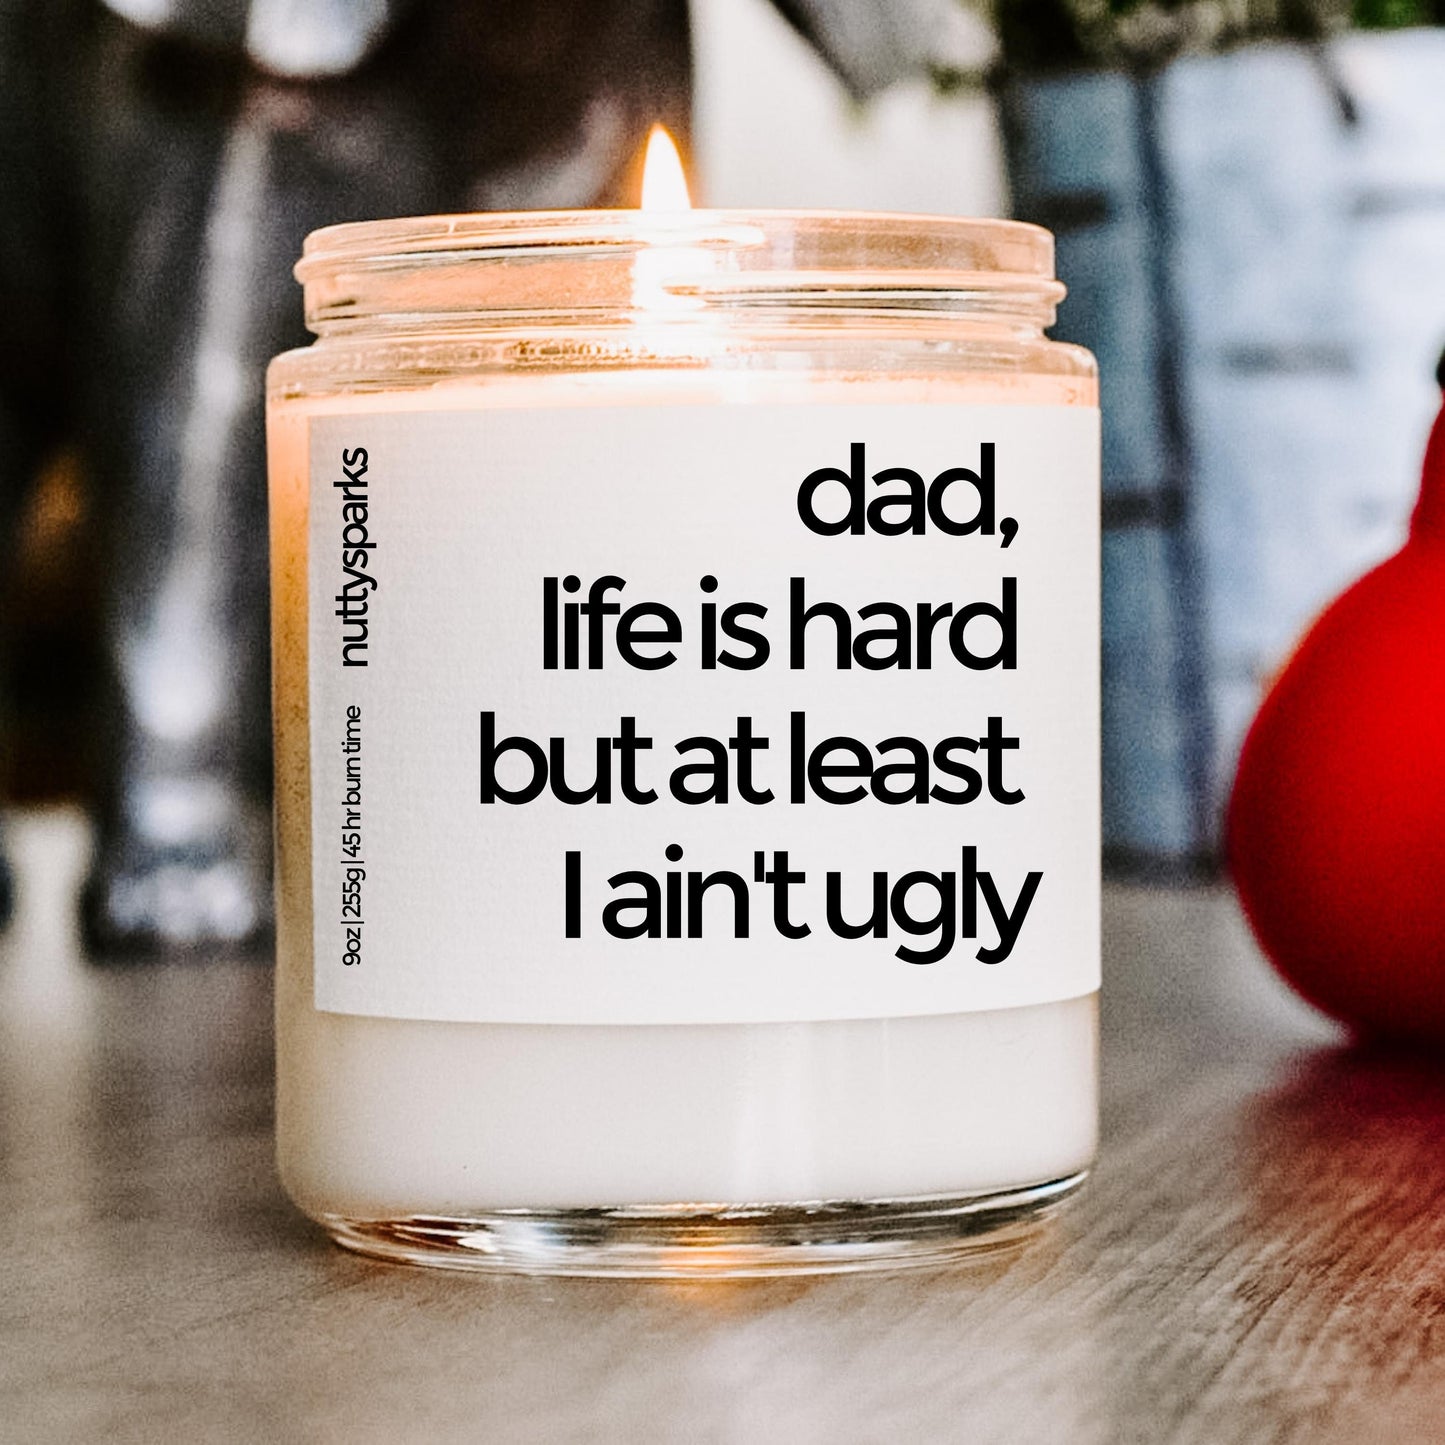 dad, life is hard but at least i ain't ugly